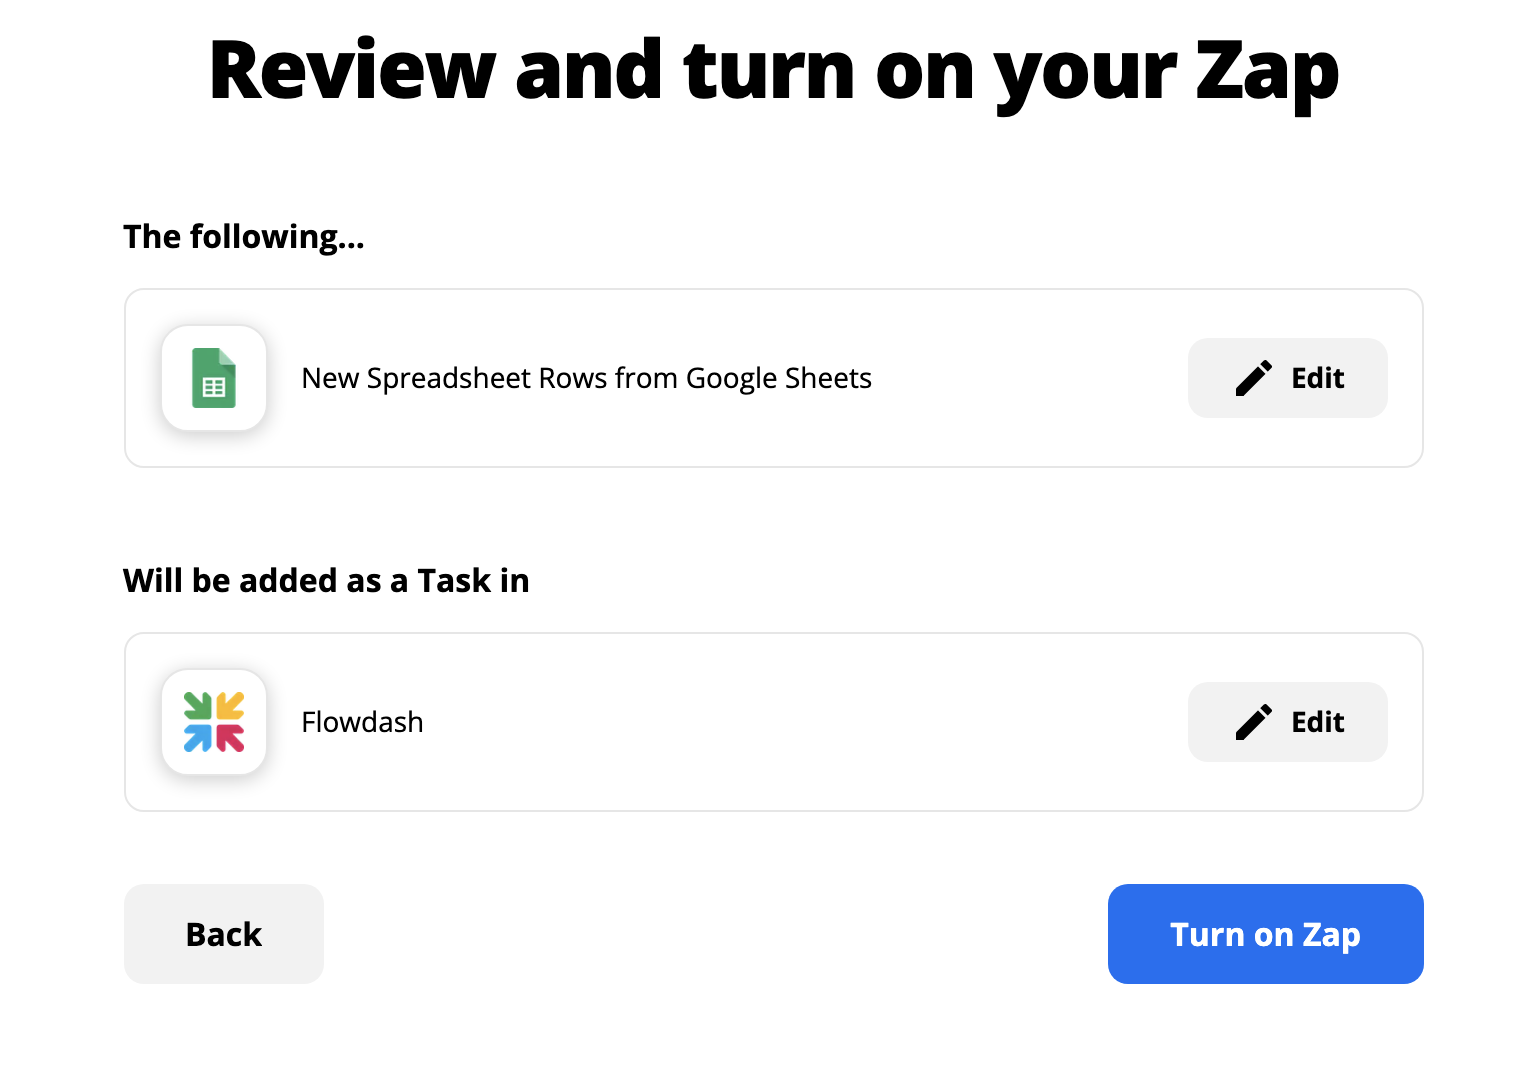 You can now copy & paste steps in your Zaps!